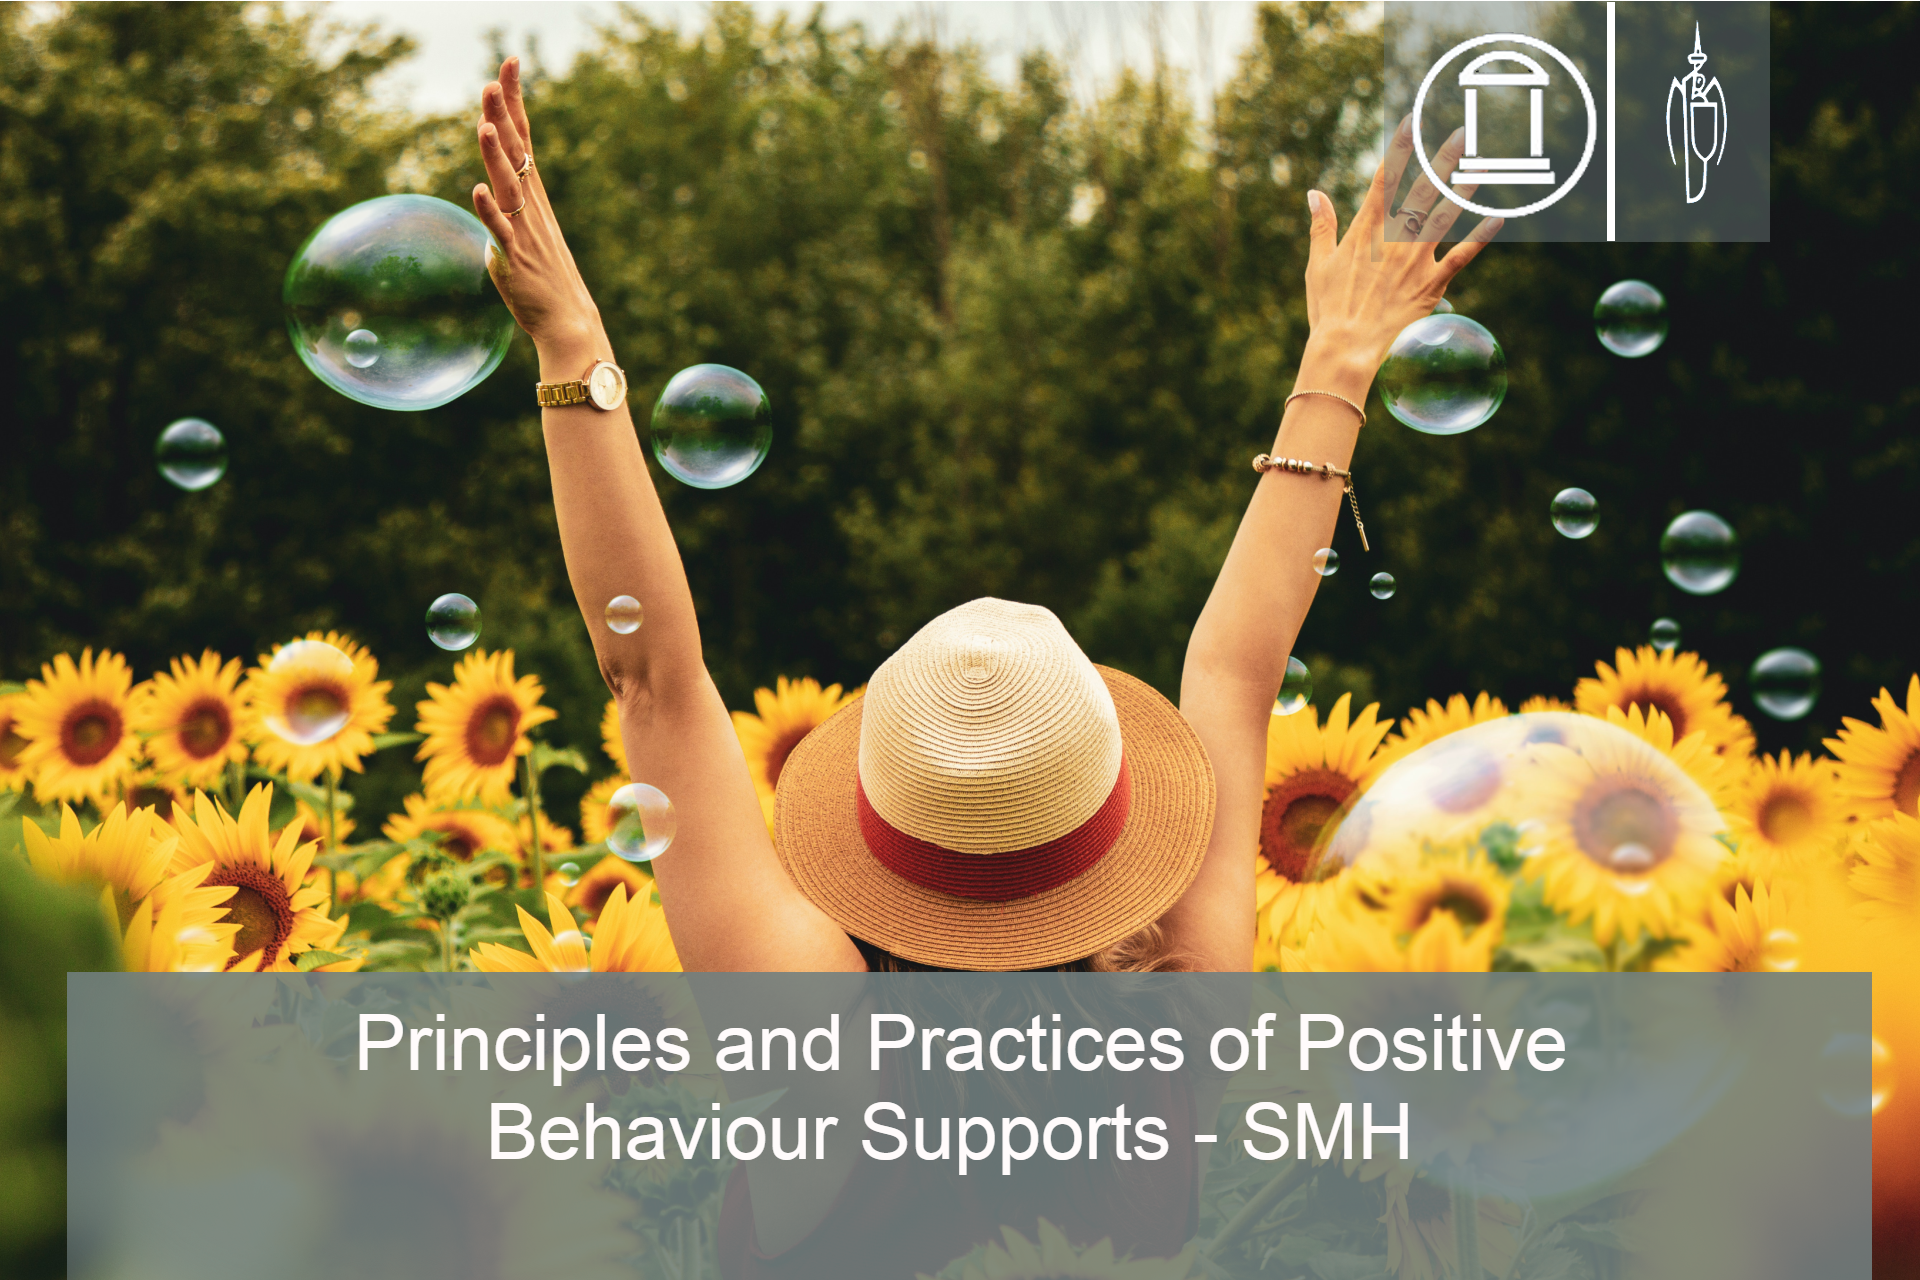 Principles and Practices of Positive Behaviour Supports - SMH 